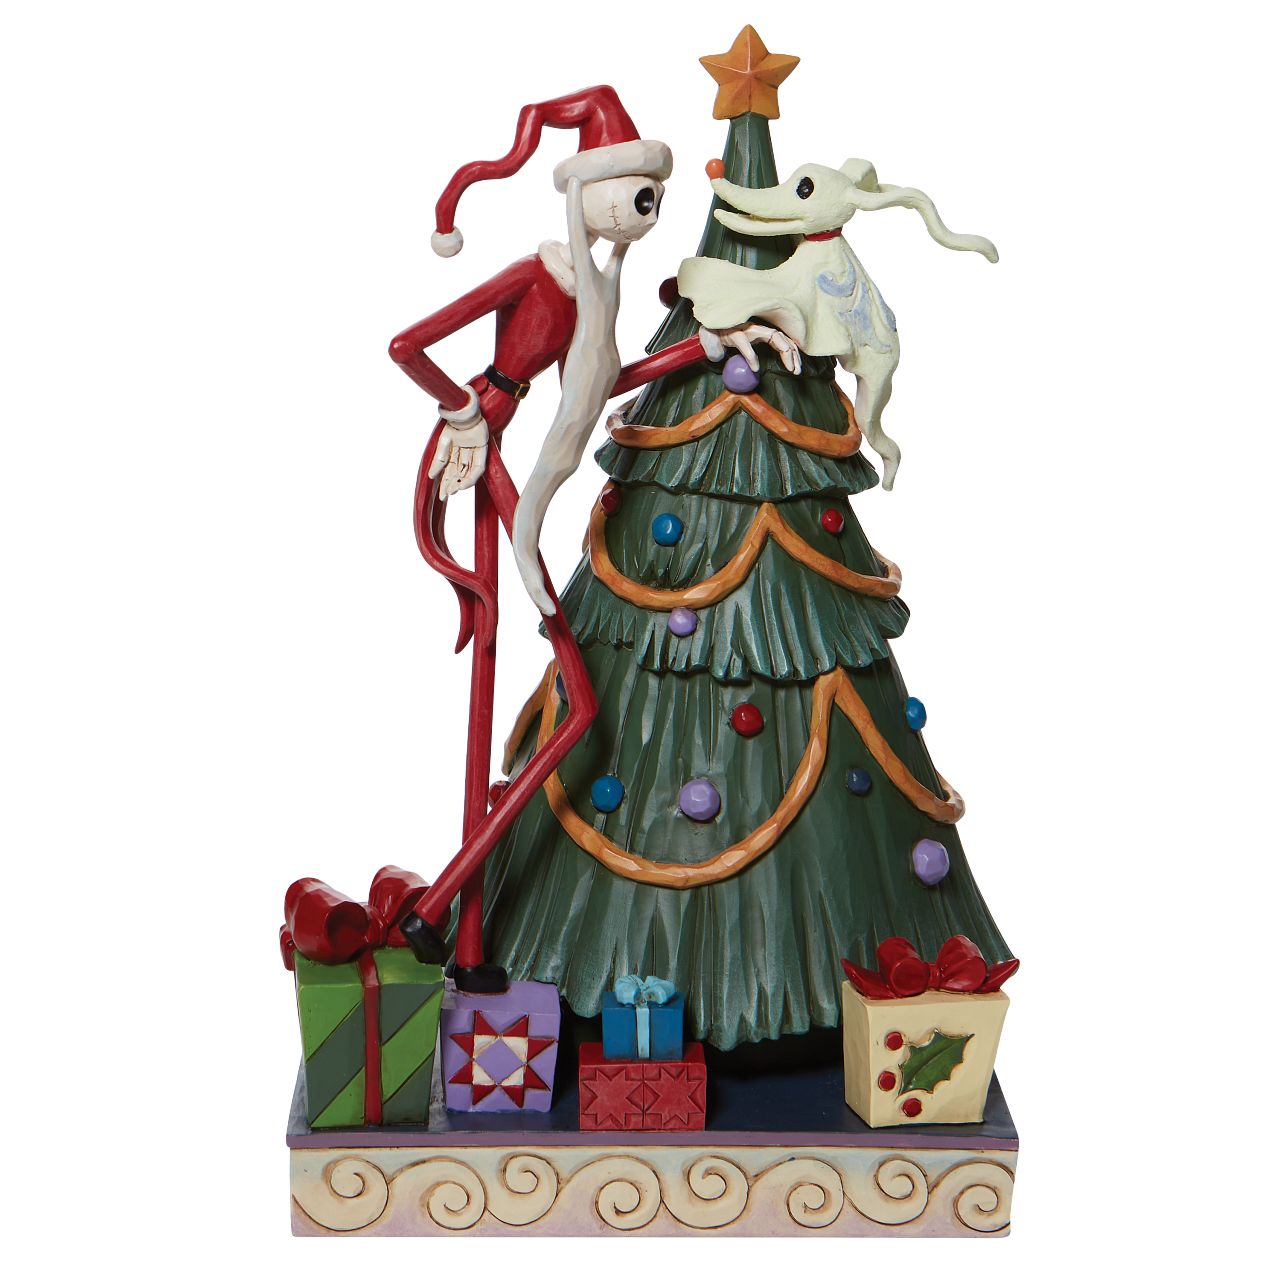 Nightmare Before Christmas Santa Jack with Zero by Tree Figurine  "Decking the Halls" Dressed as Santa Claus, Jack Skellington and his glow in the dark dog, Zero, gather around the Christmas tree. Will Jack steal the presents or will he be inspired by the giving season?